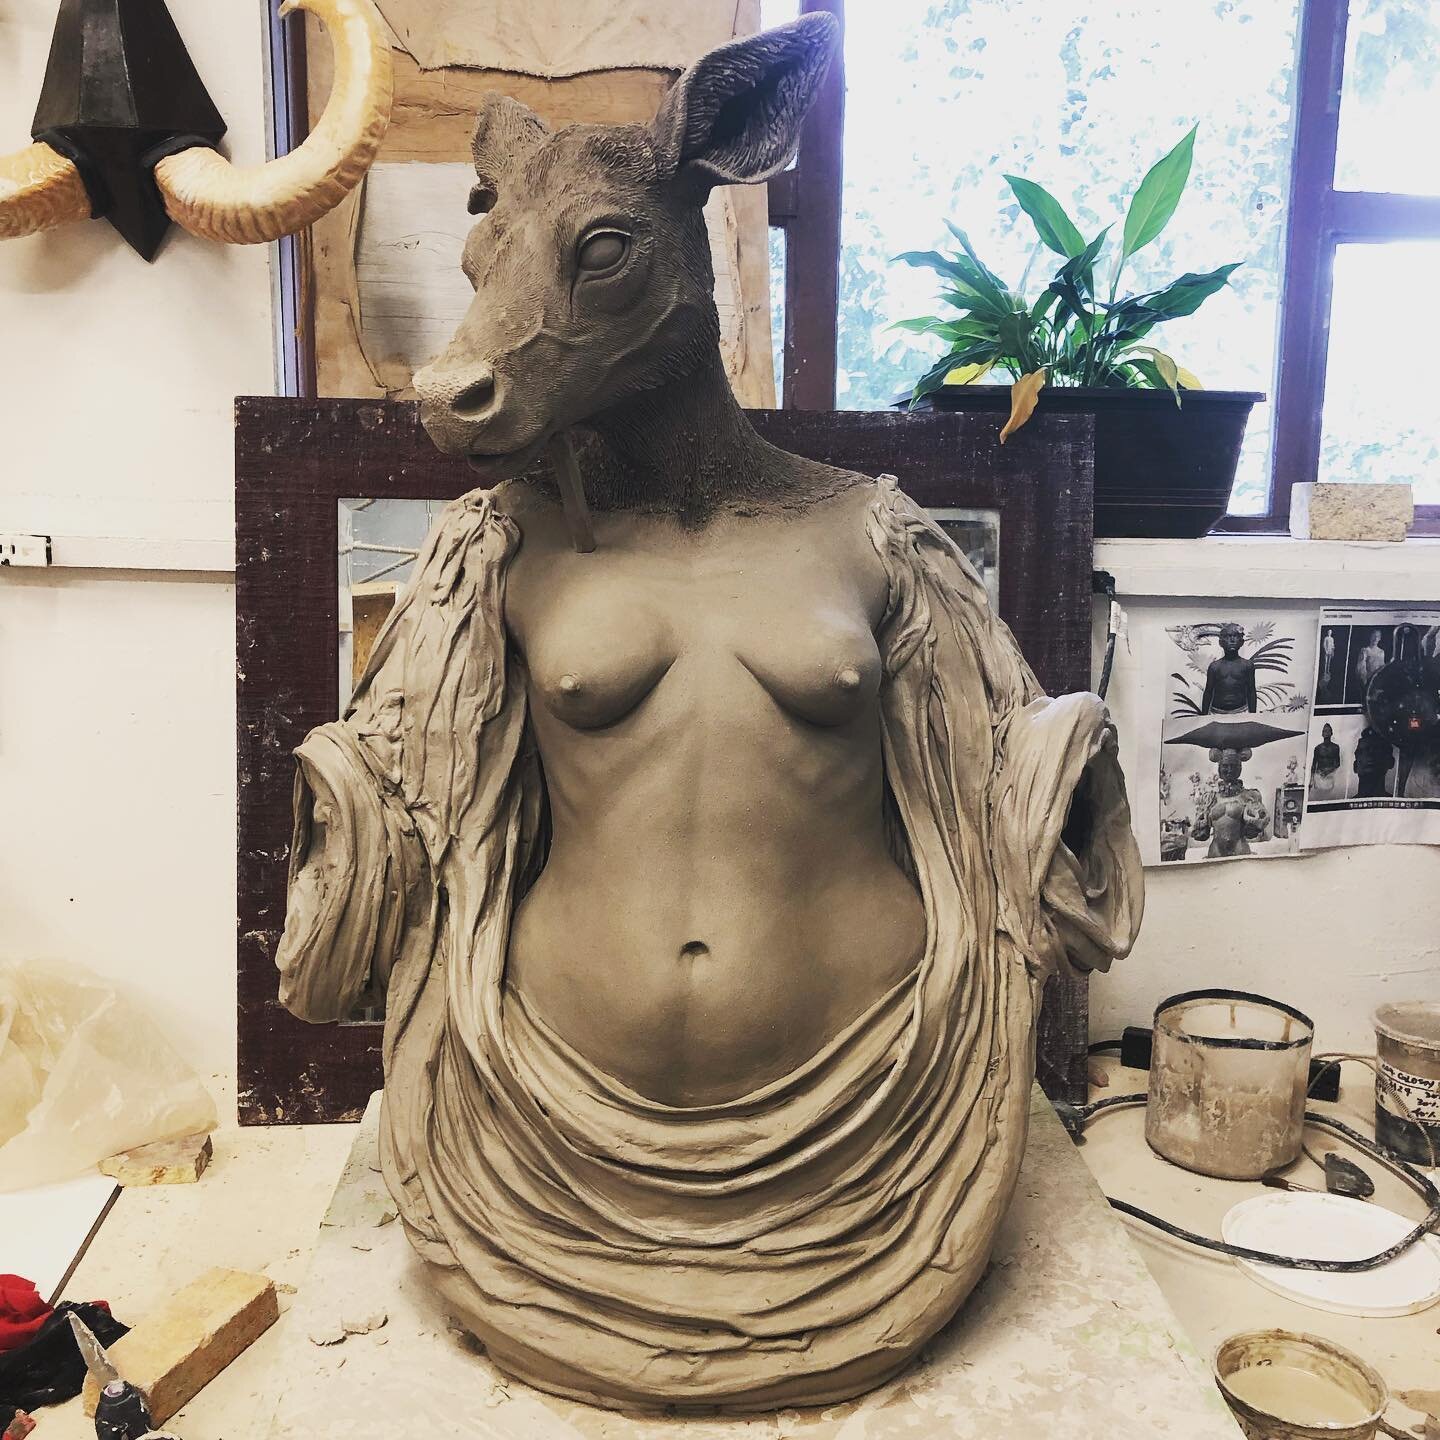 Finally! The texture has come together! &hellip;. Slowly getting there 
.
.
.
.
.
#figurativeart #figurativesculpture #wip #wipart #wipartwork #n&uuml;deart #clay #ceramicsculpture #clayart #claysculpture #wetclay